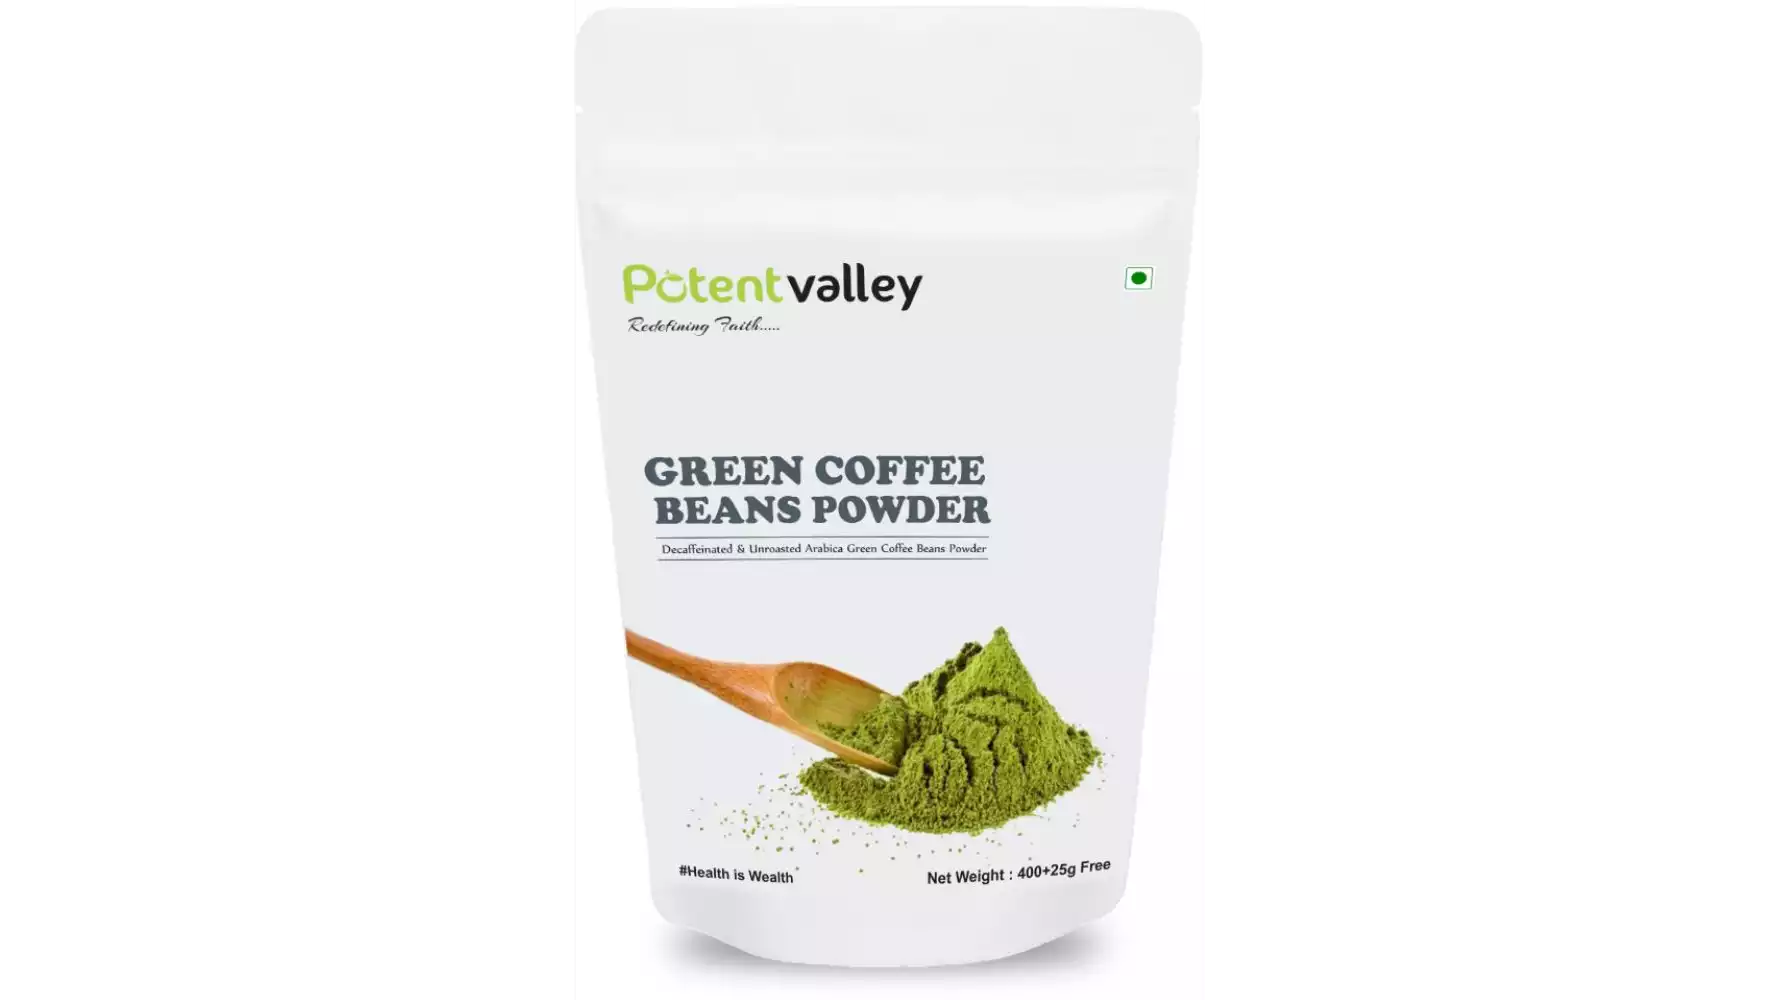 Potentvalley Decaffeinated Arabica Unroasted Green Coffee Beans (400g)